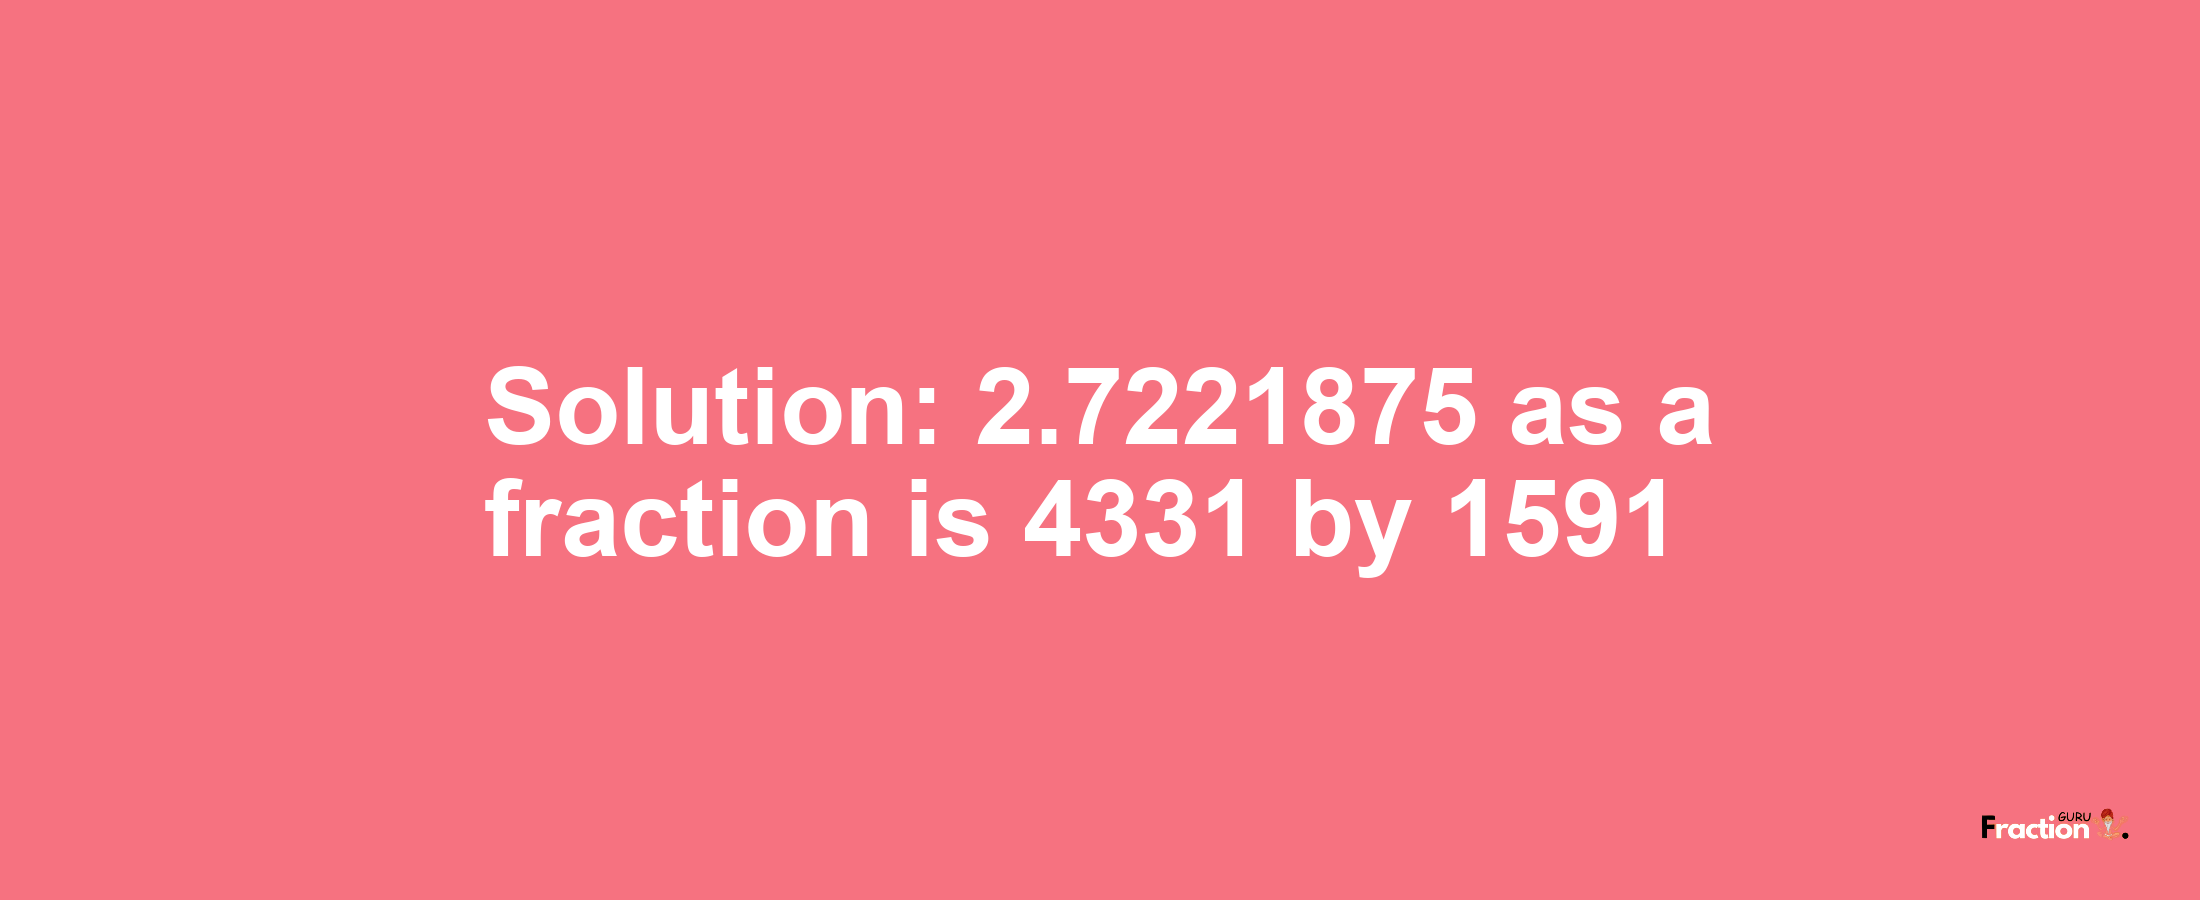 Solution:2.7221875 as a fraction is 4331/1591